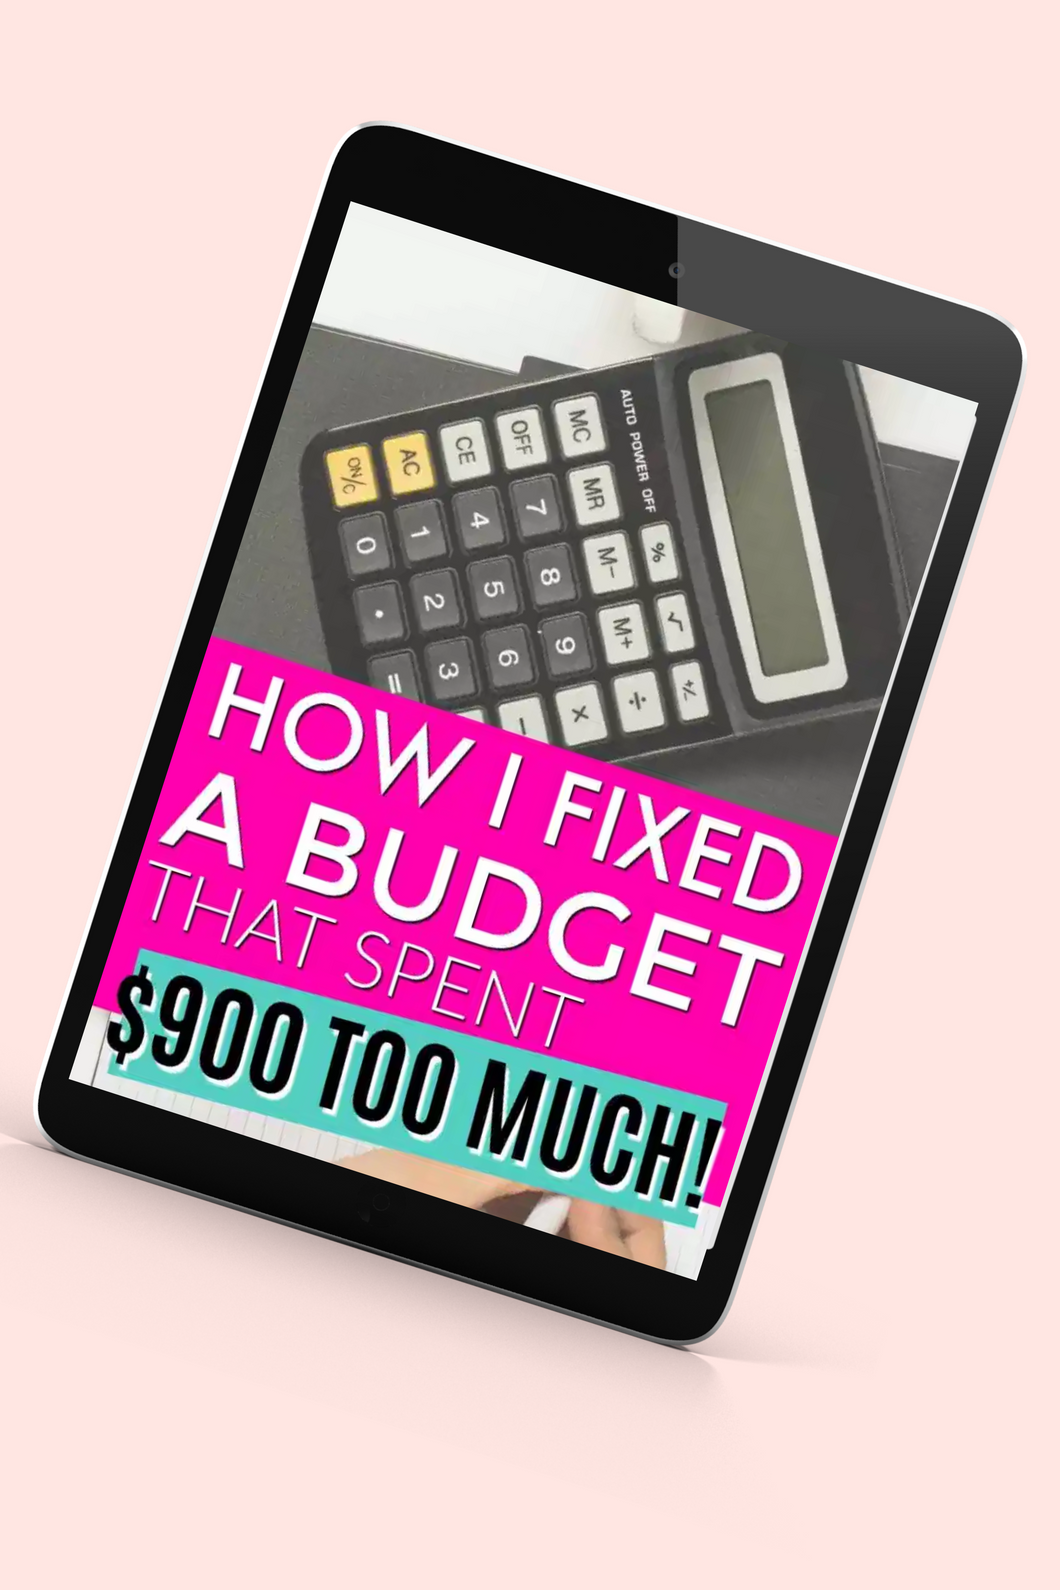 Fixing A Budget That Spends More Than We Make